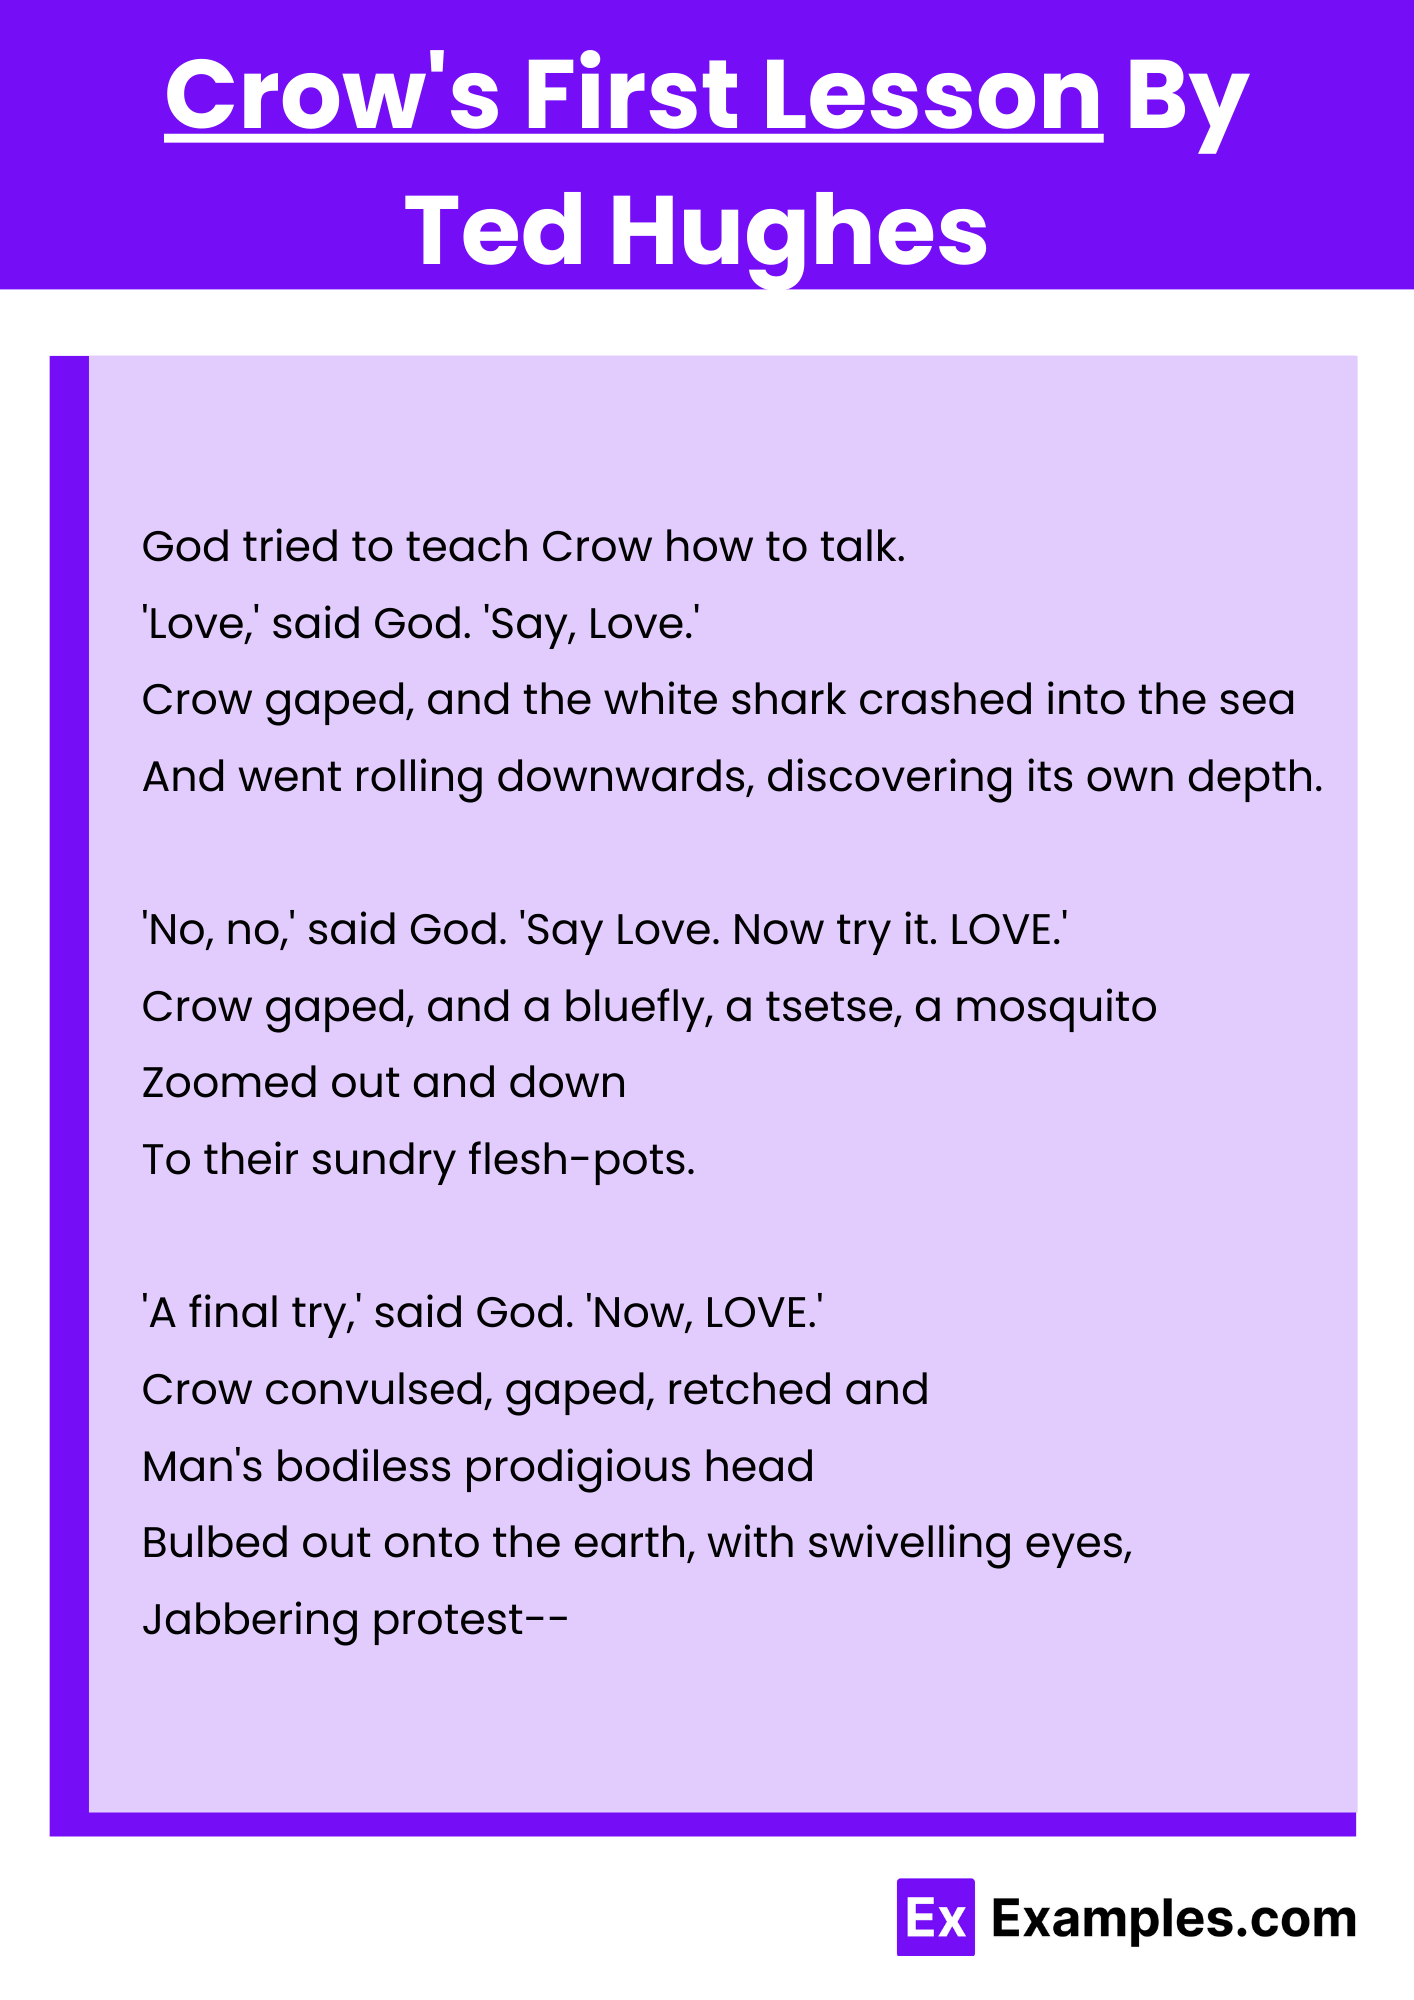 Crow's First Lesson By Ted Hughes